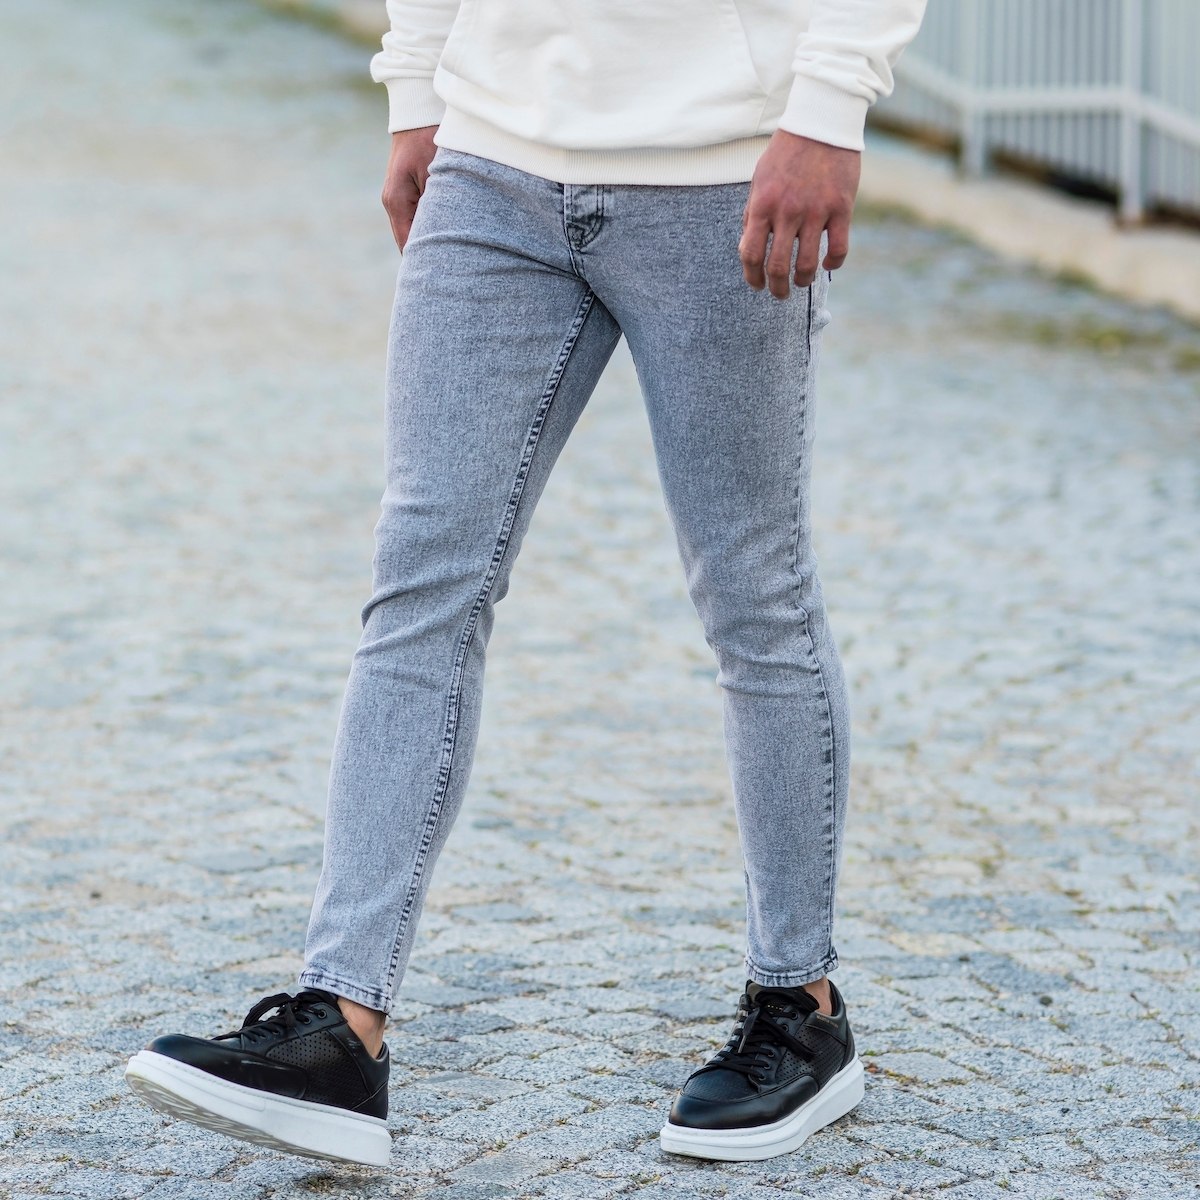 Men's Basic Skinny Jeans In Washed Gray